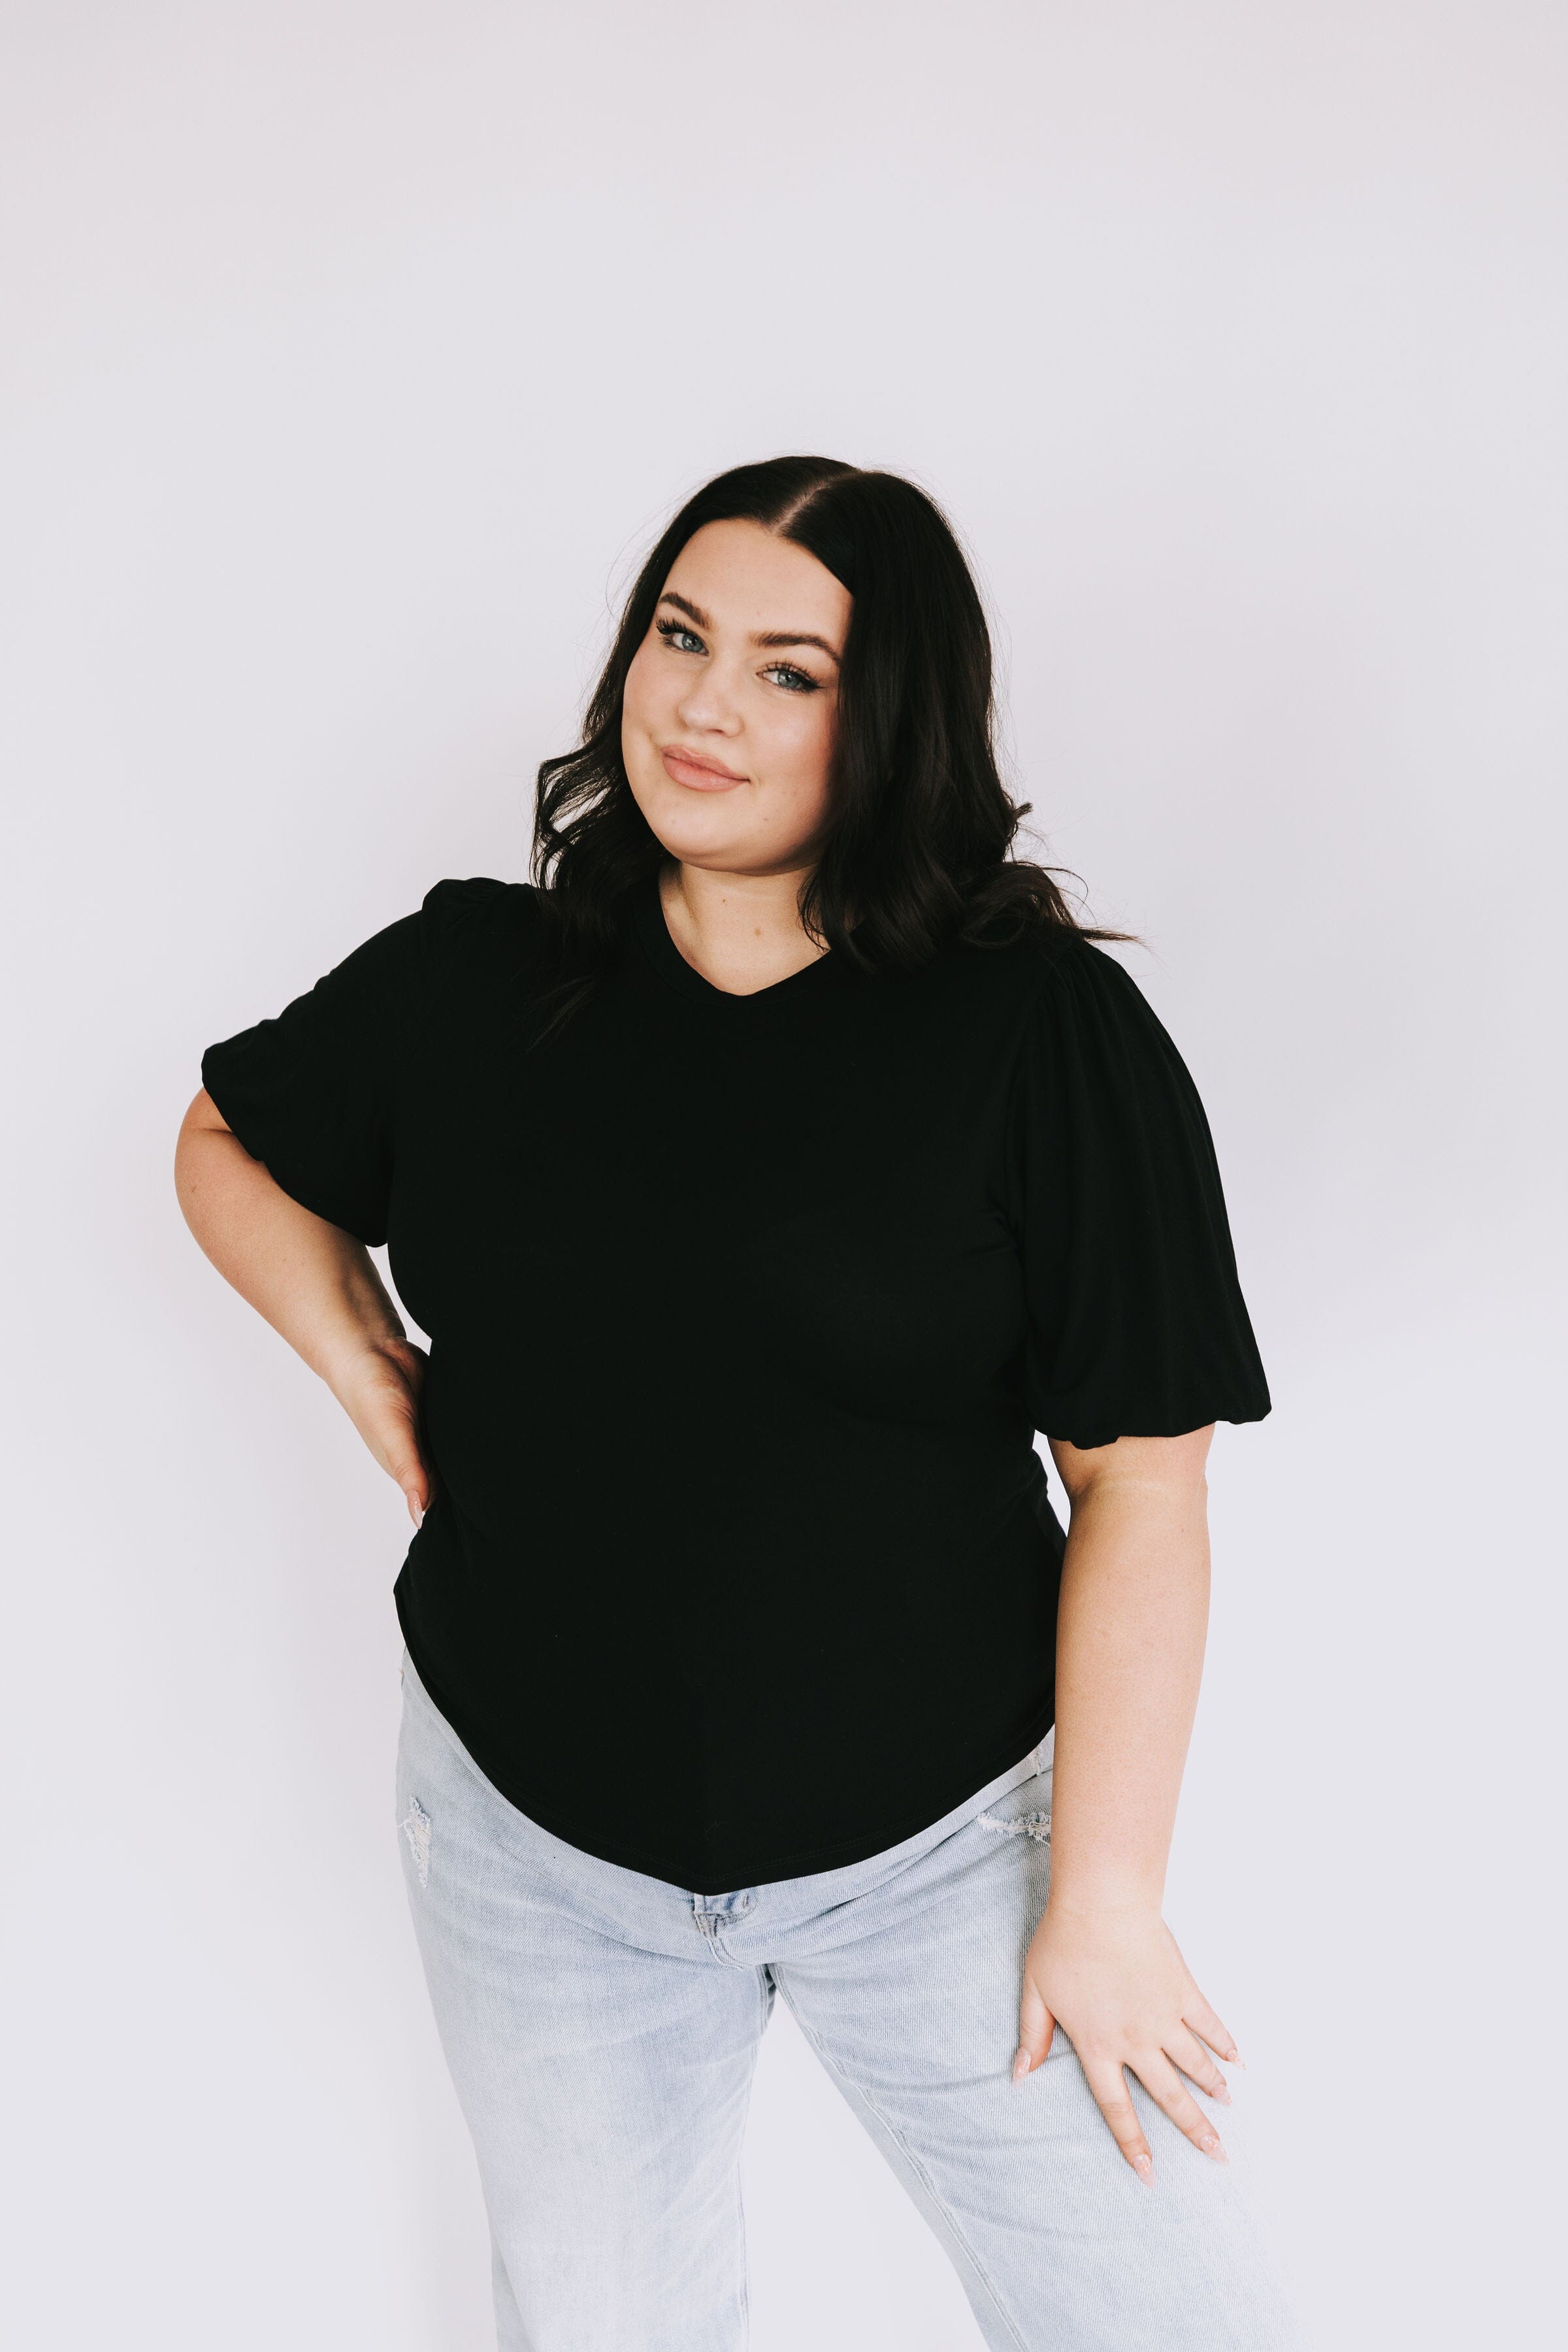 PLUS SIZE - Live Another Day Top